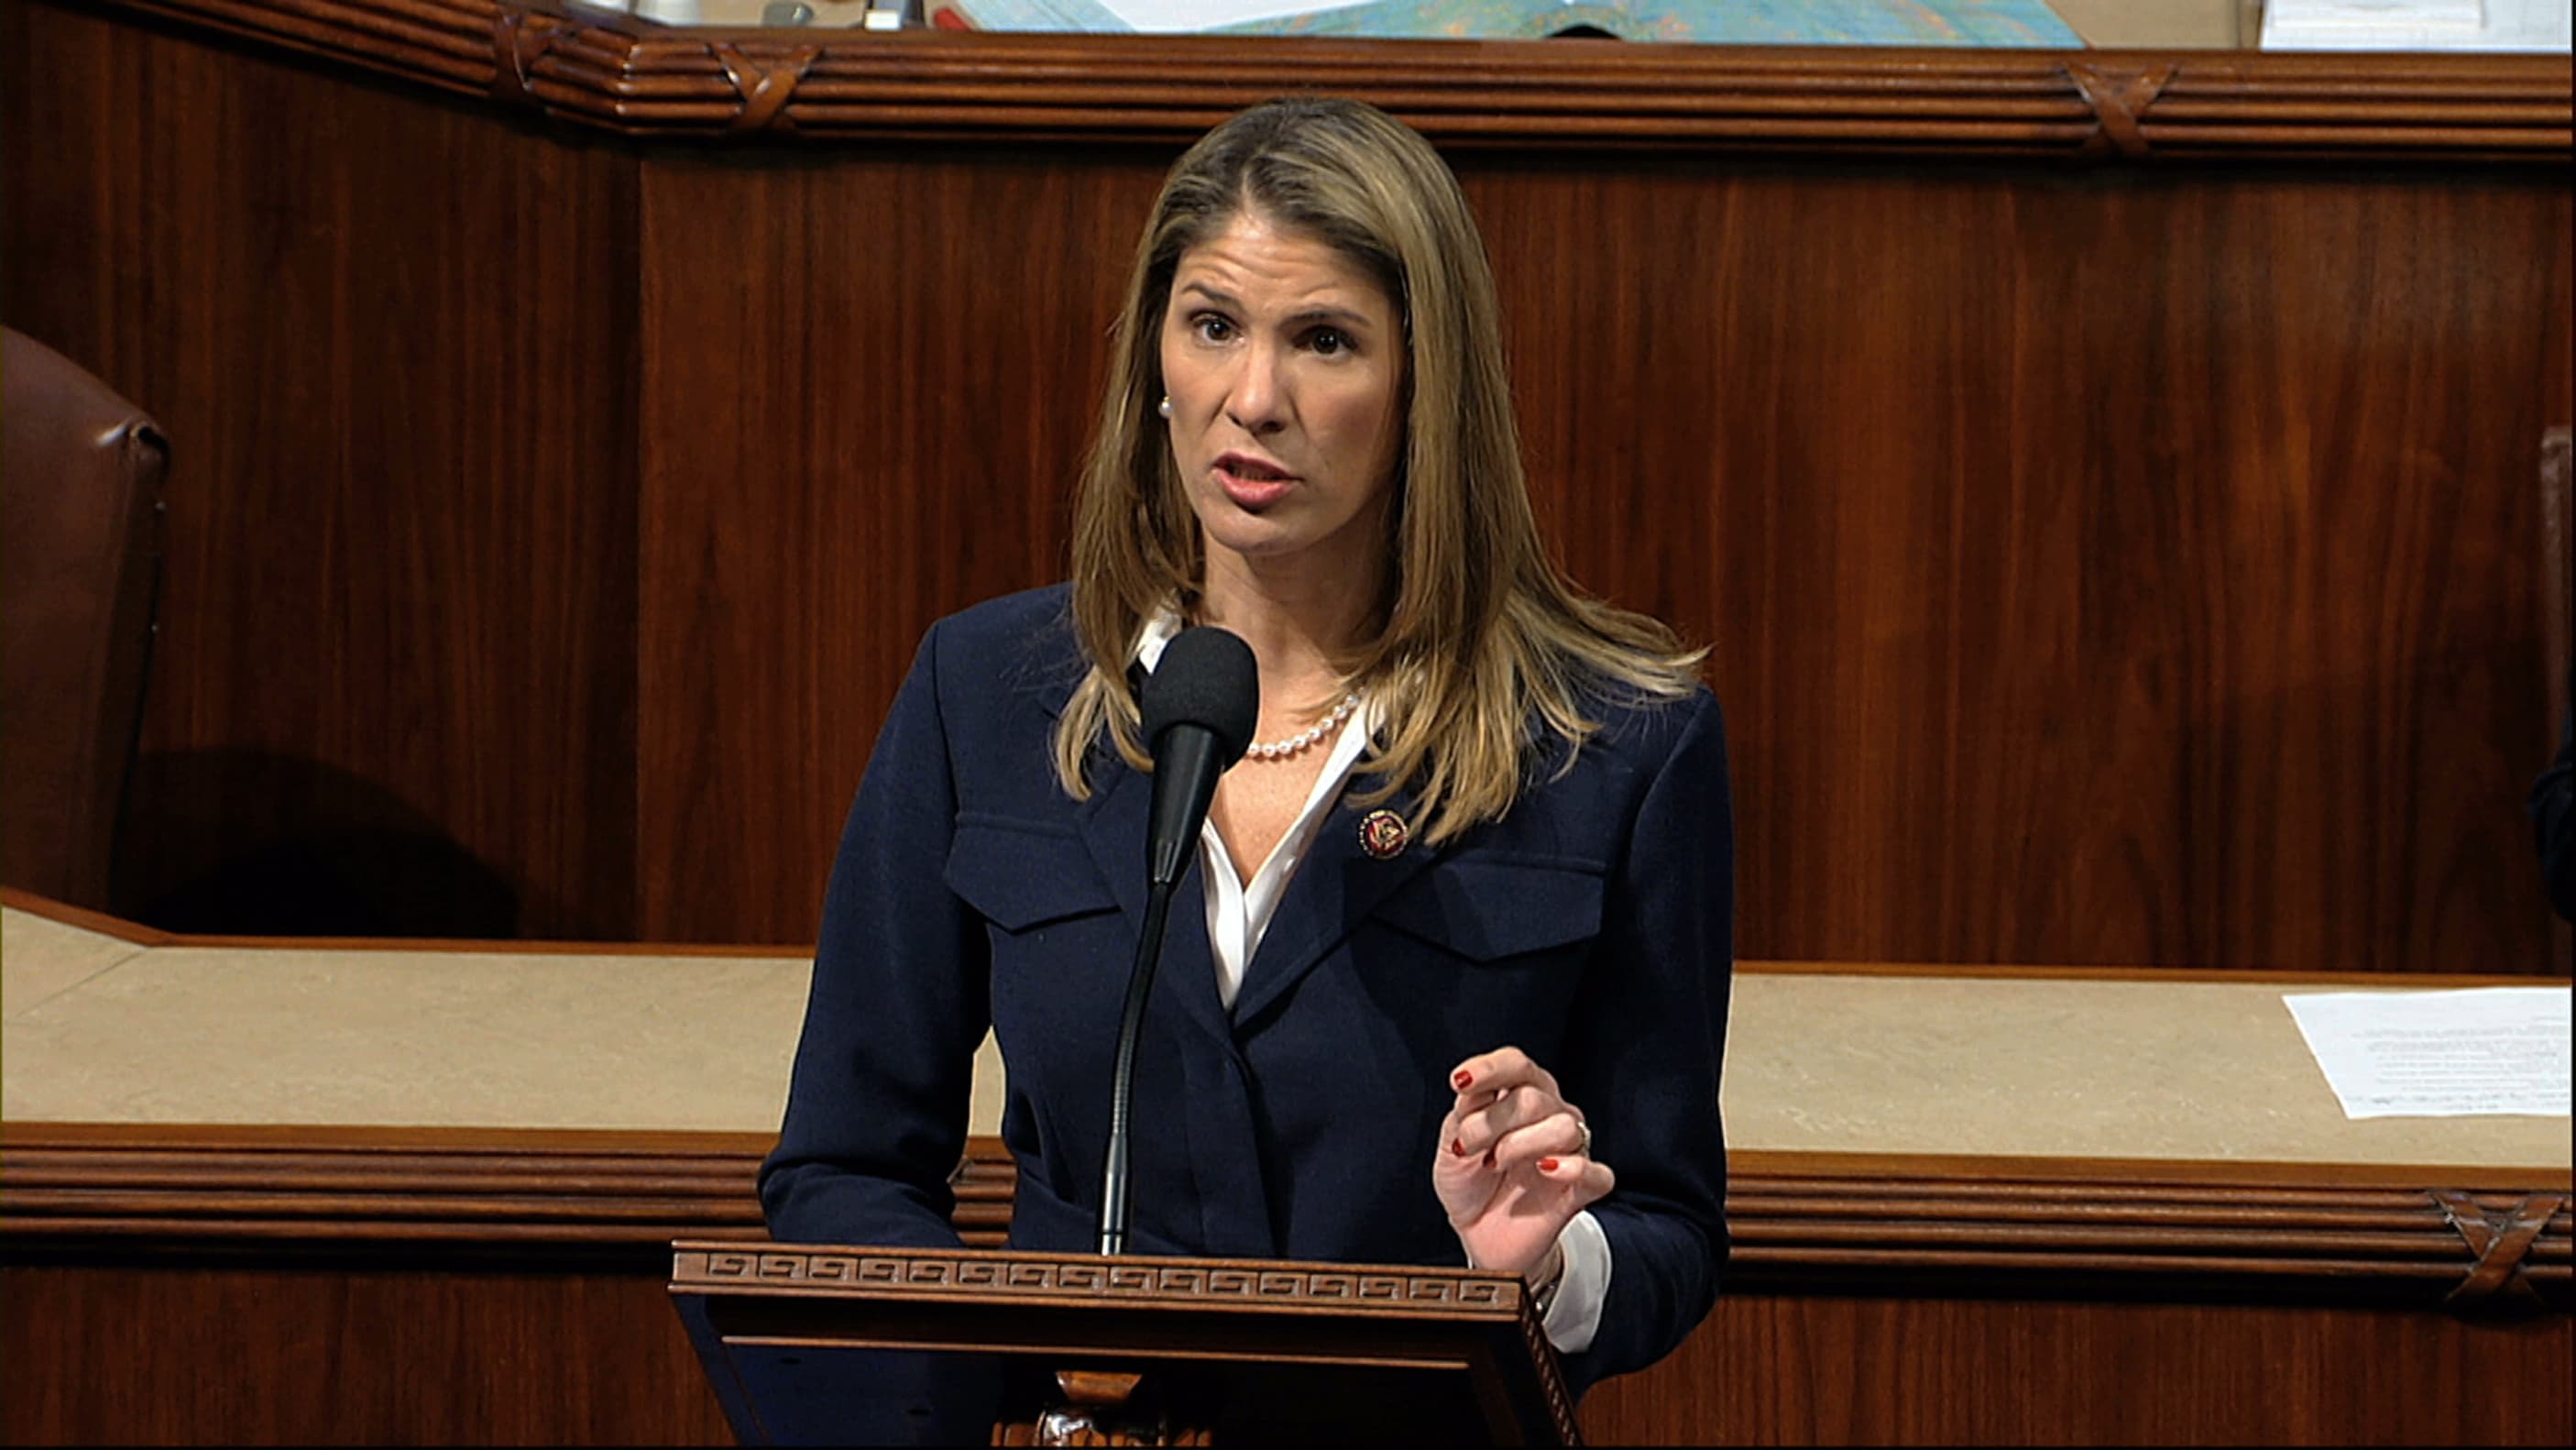 Rep. Lori Trahan, D-Mass., speaks as the House of Representatives debated the articles of impeachment against President Trump at the Capitol in Washington in December 2019. (House Television via AP)